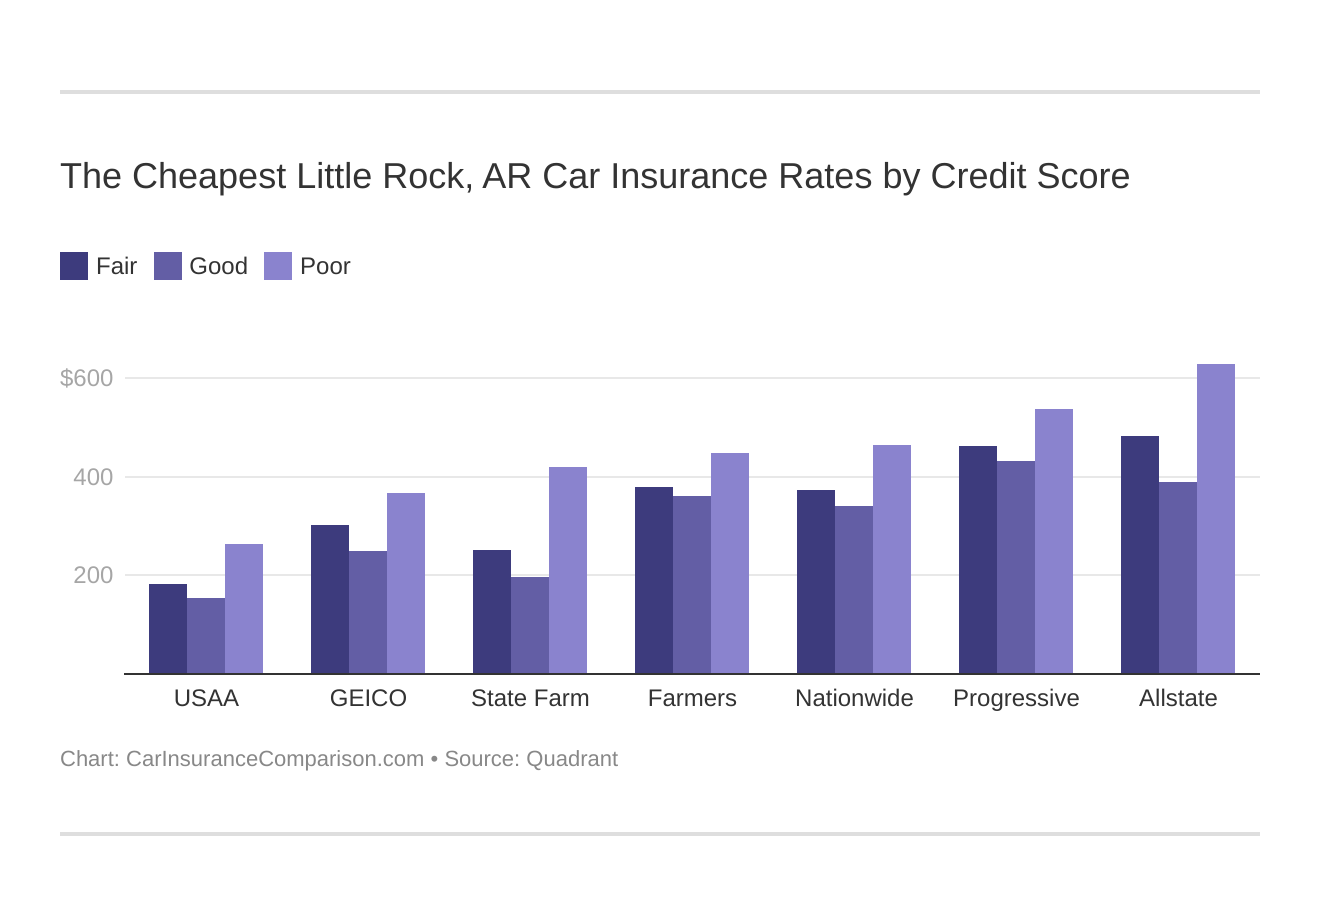 The Cheapest Little Rock, AR Car Insurance Rates by Credit Score